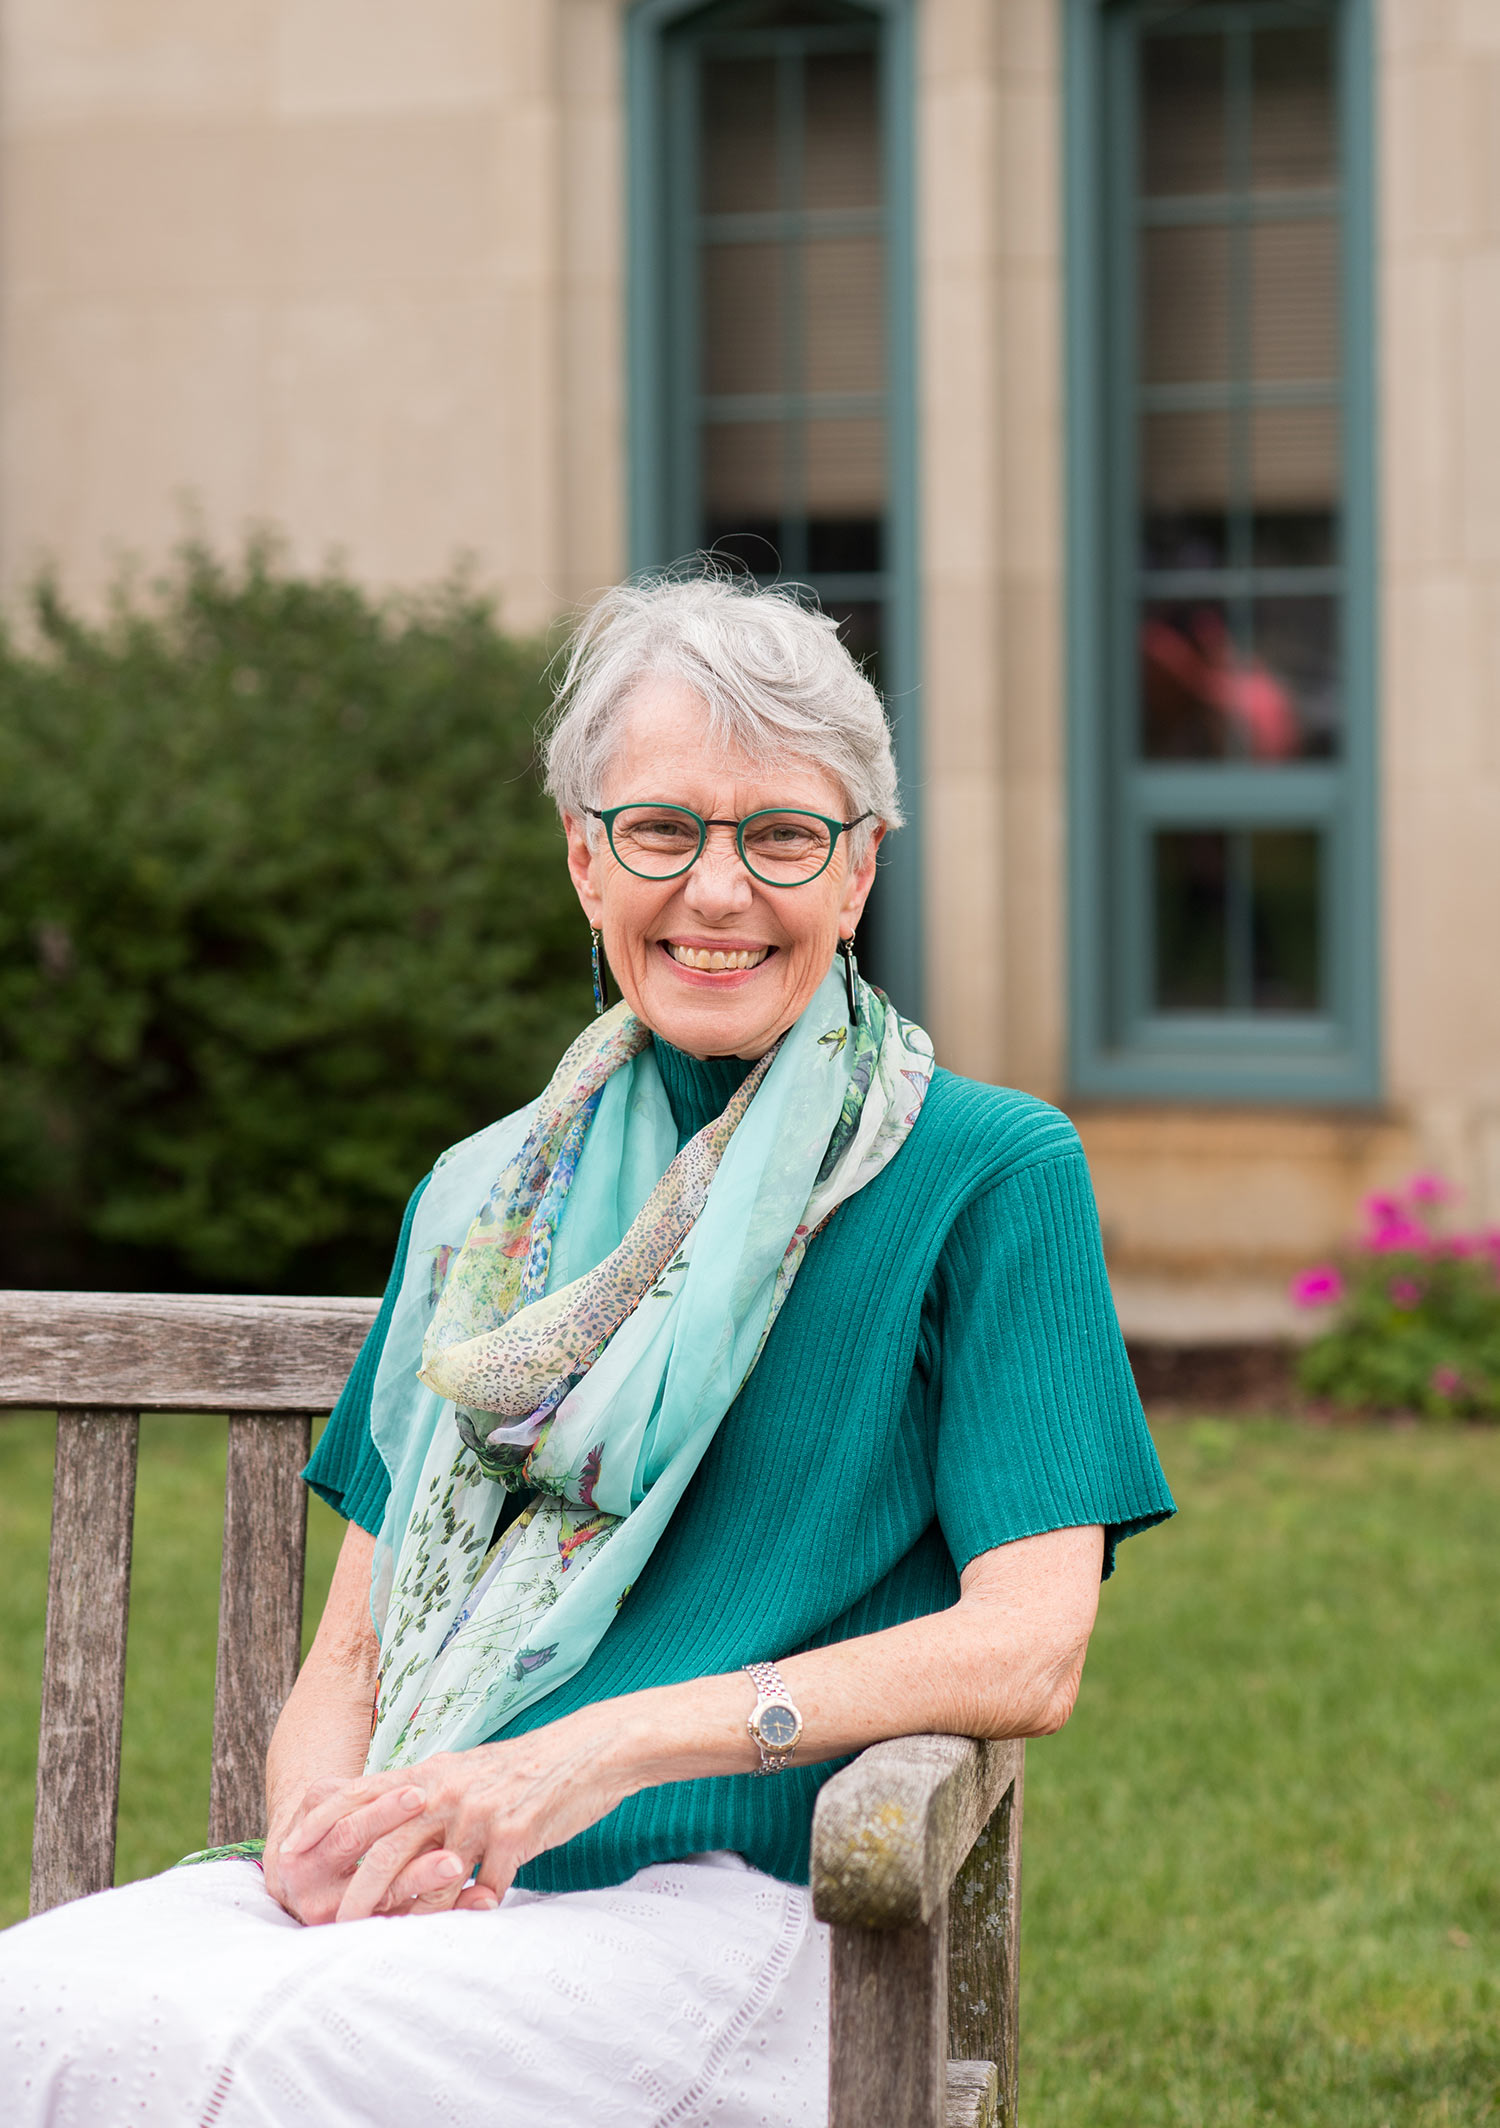 Photo of Dean Moore sitting on a bench in a scarf and teal shirt. Flowers and a grass patch are seen behind her.